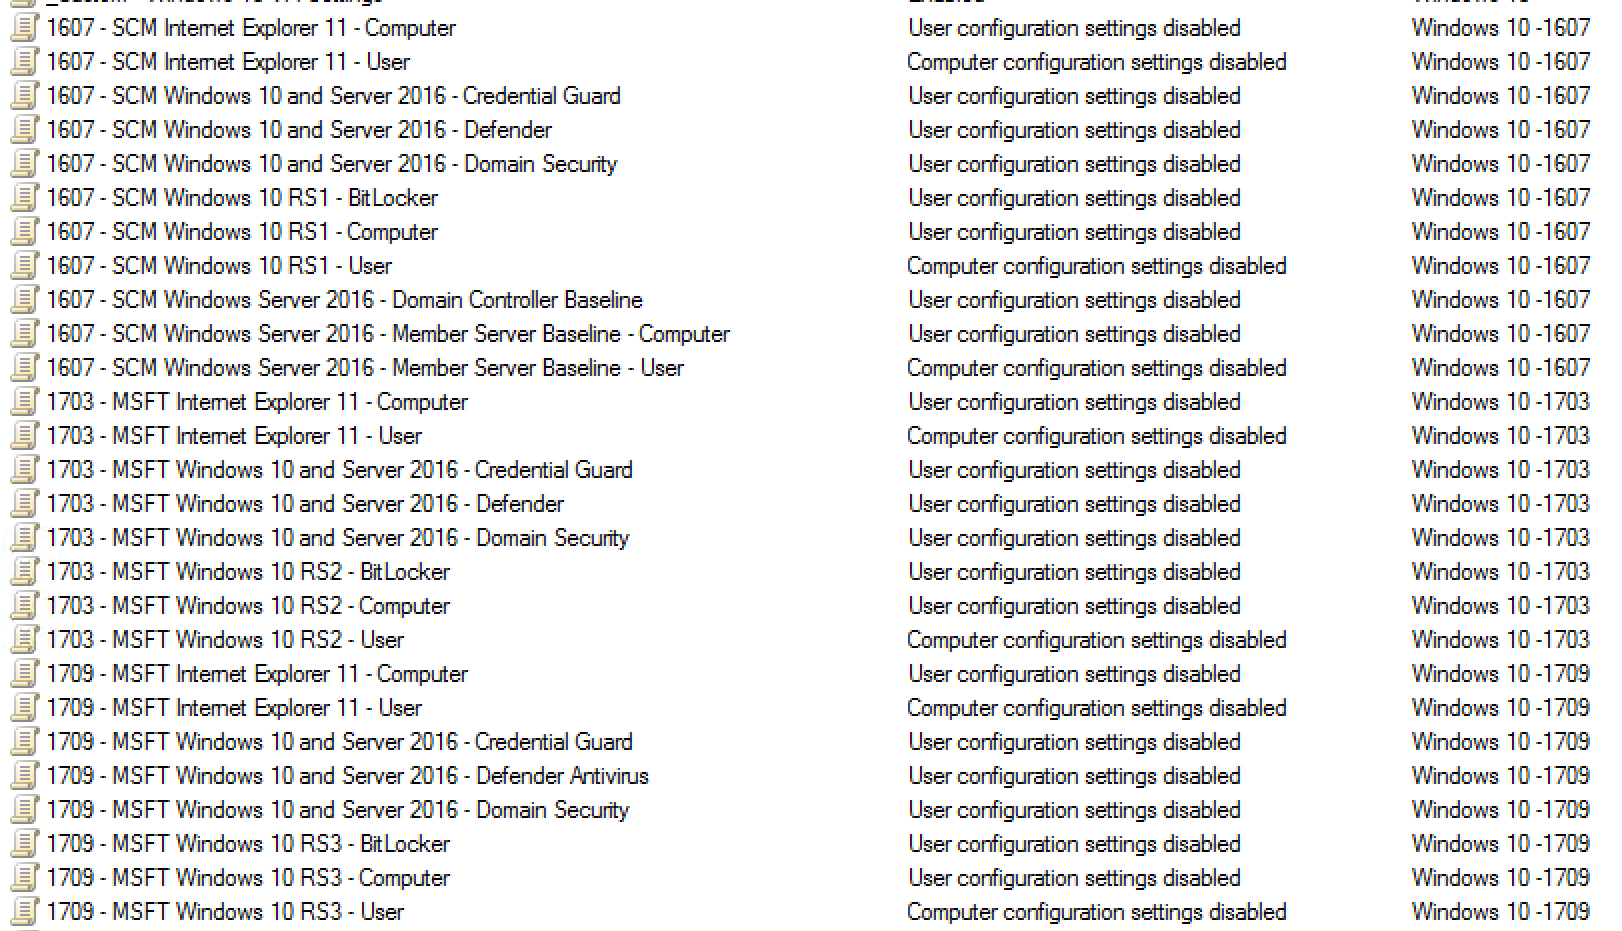 Imported Windows security baselines